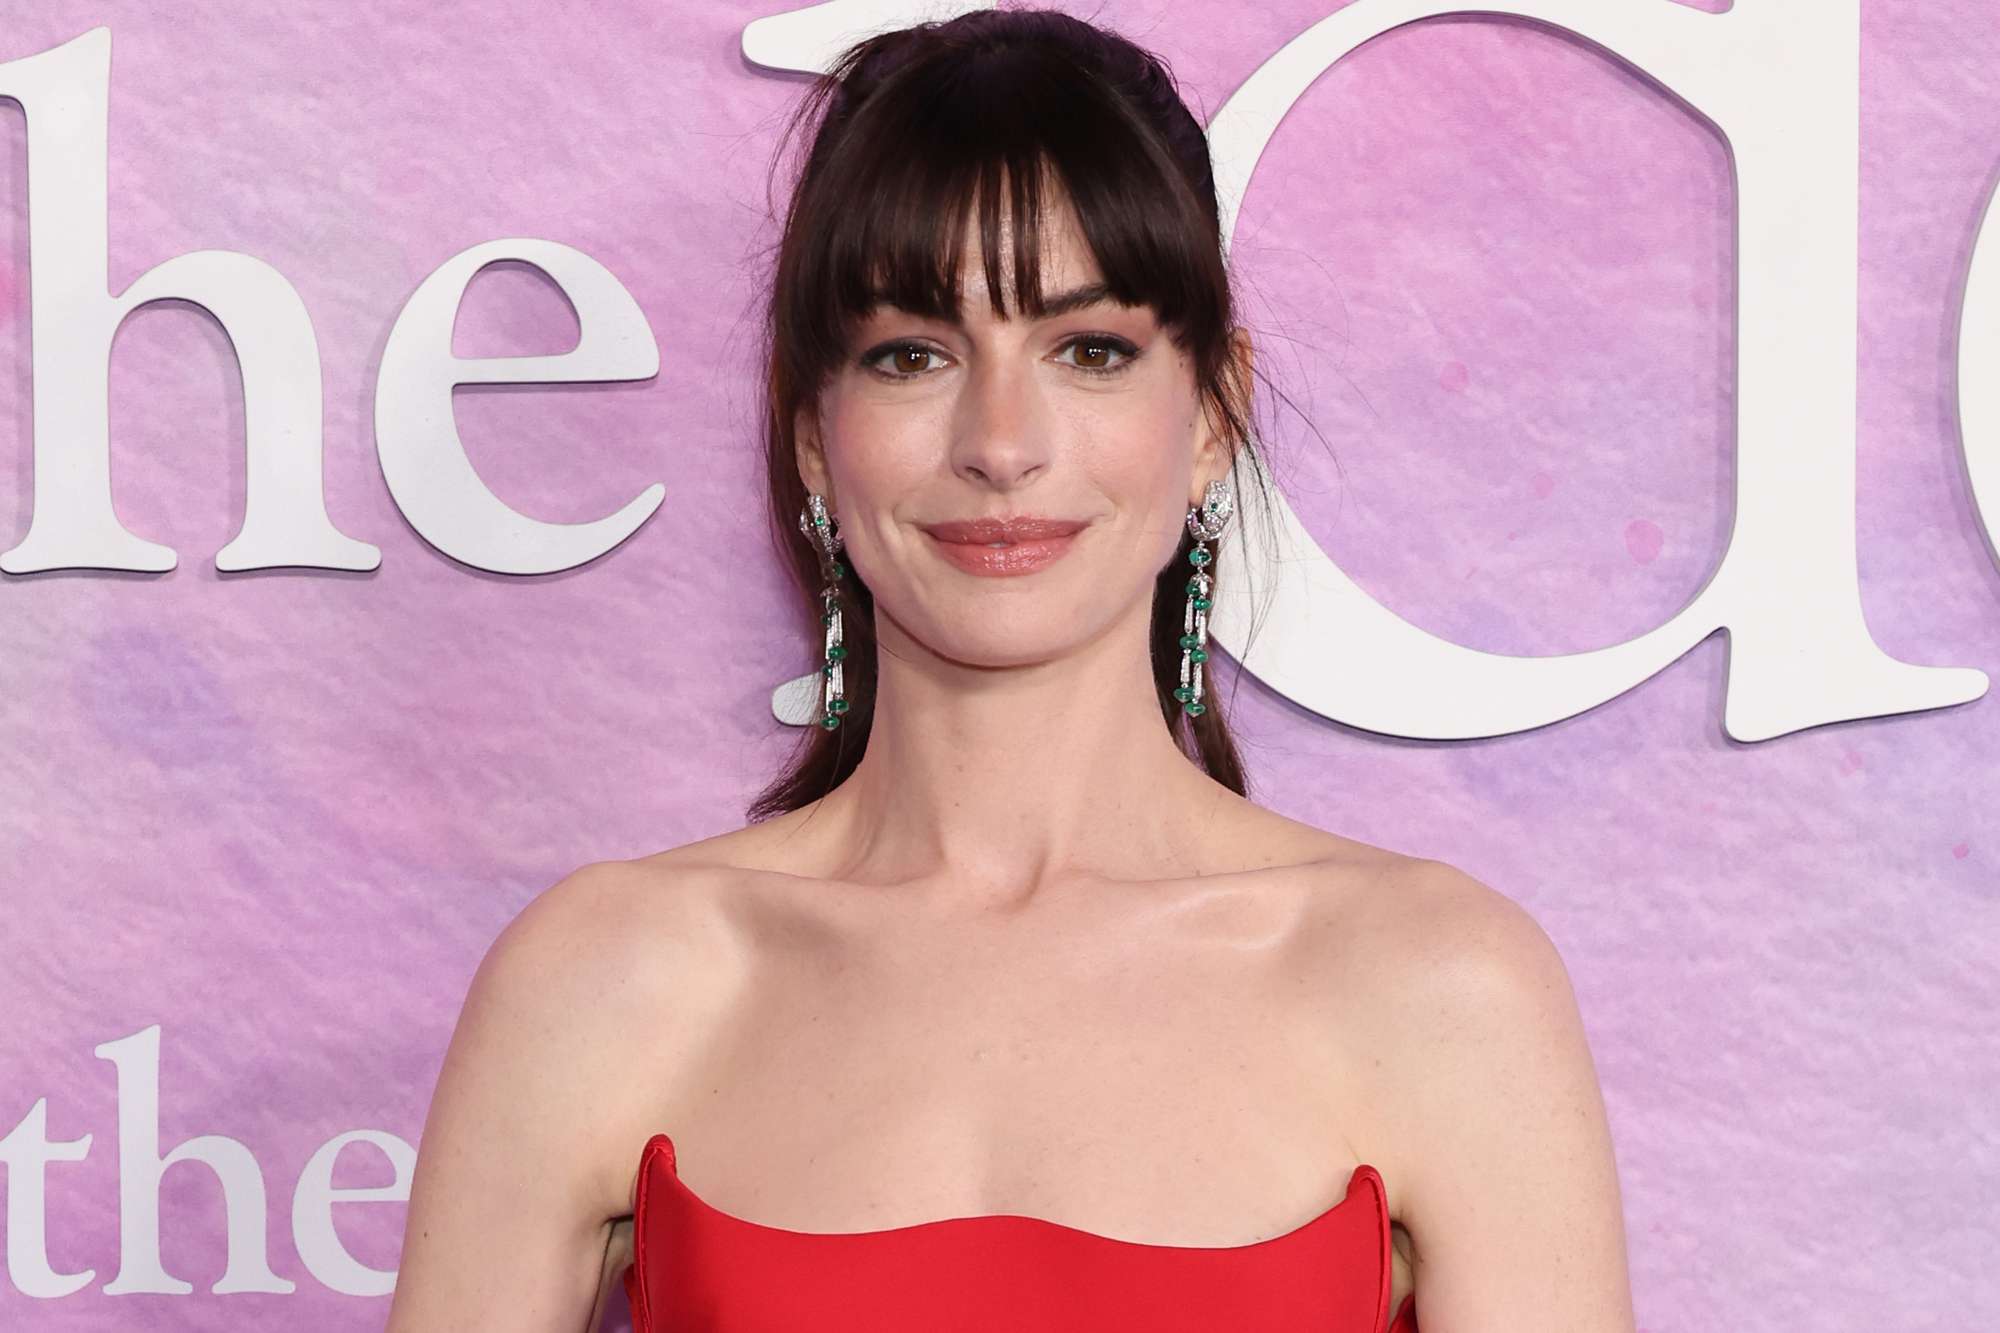 Anne Hathaway Delivers the Unexpected in Daring Look at “Idea of You” Premiere in N.Y.C.